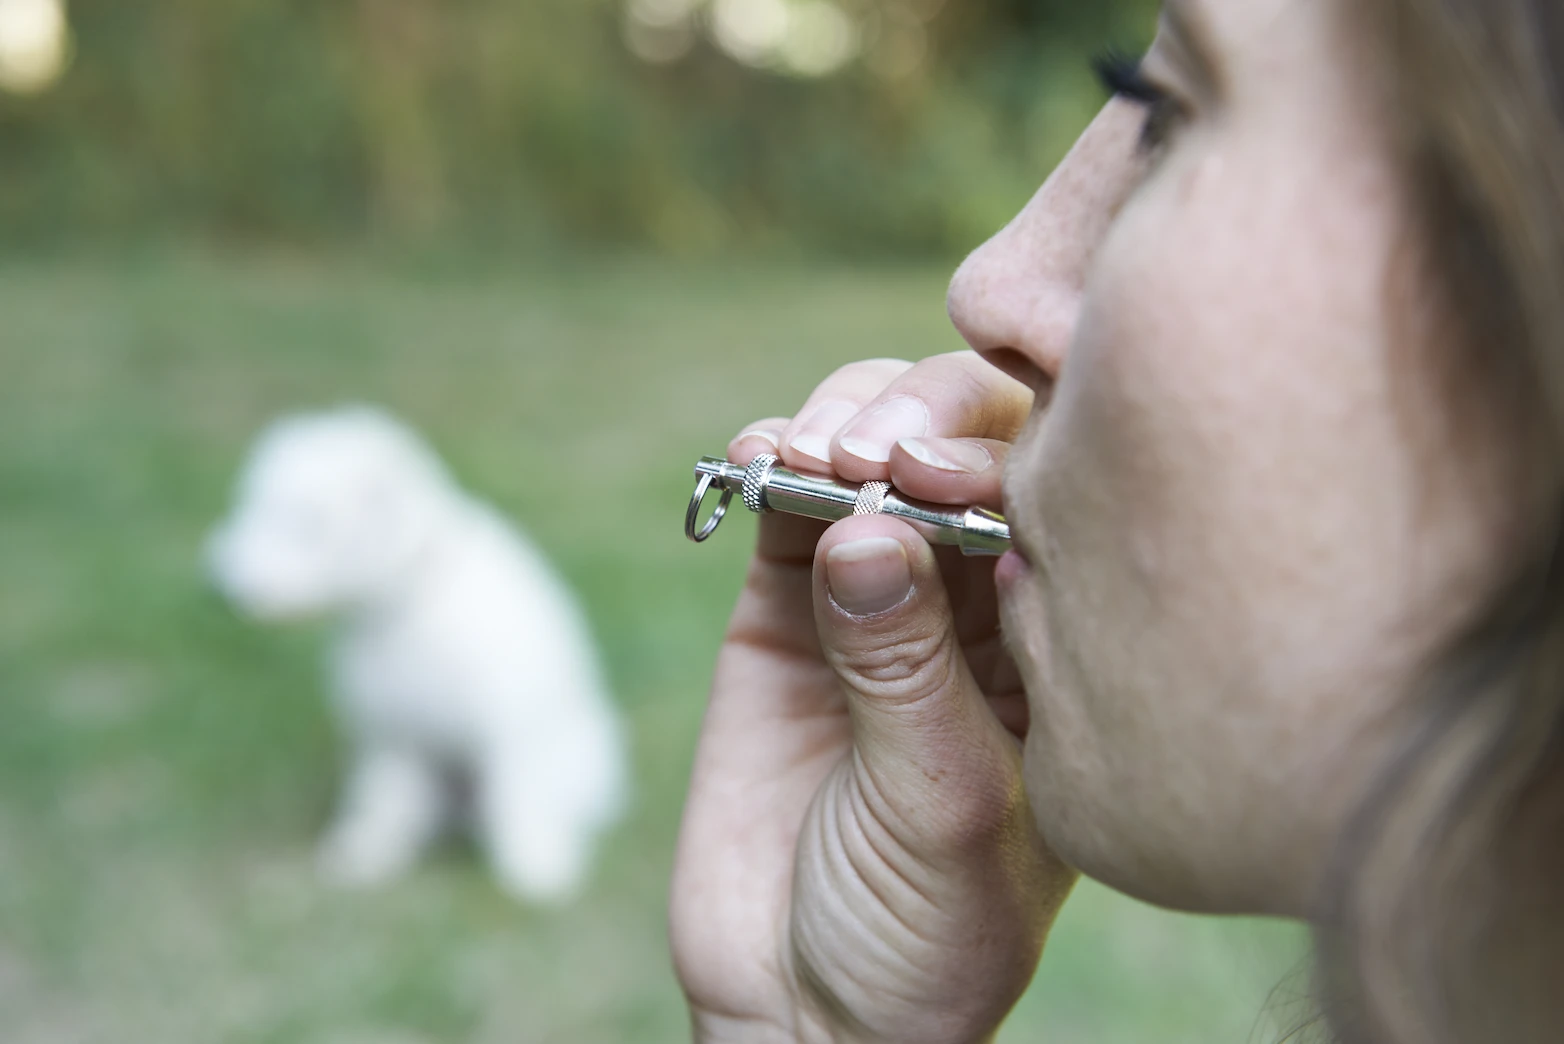 Woman training her dog with a dog whistle